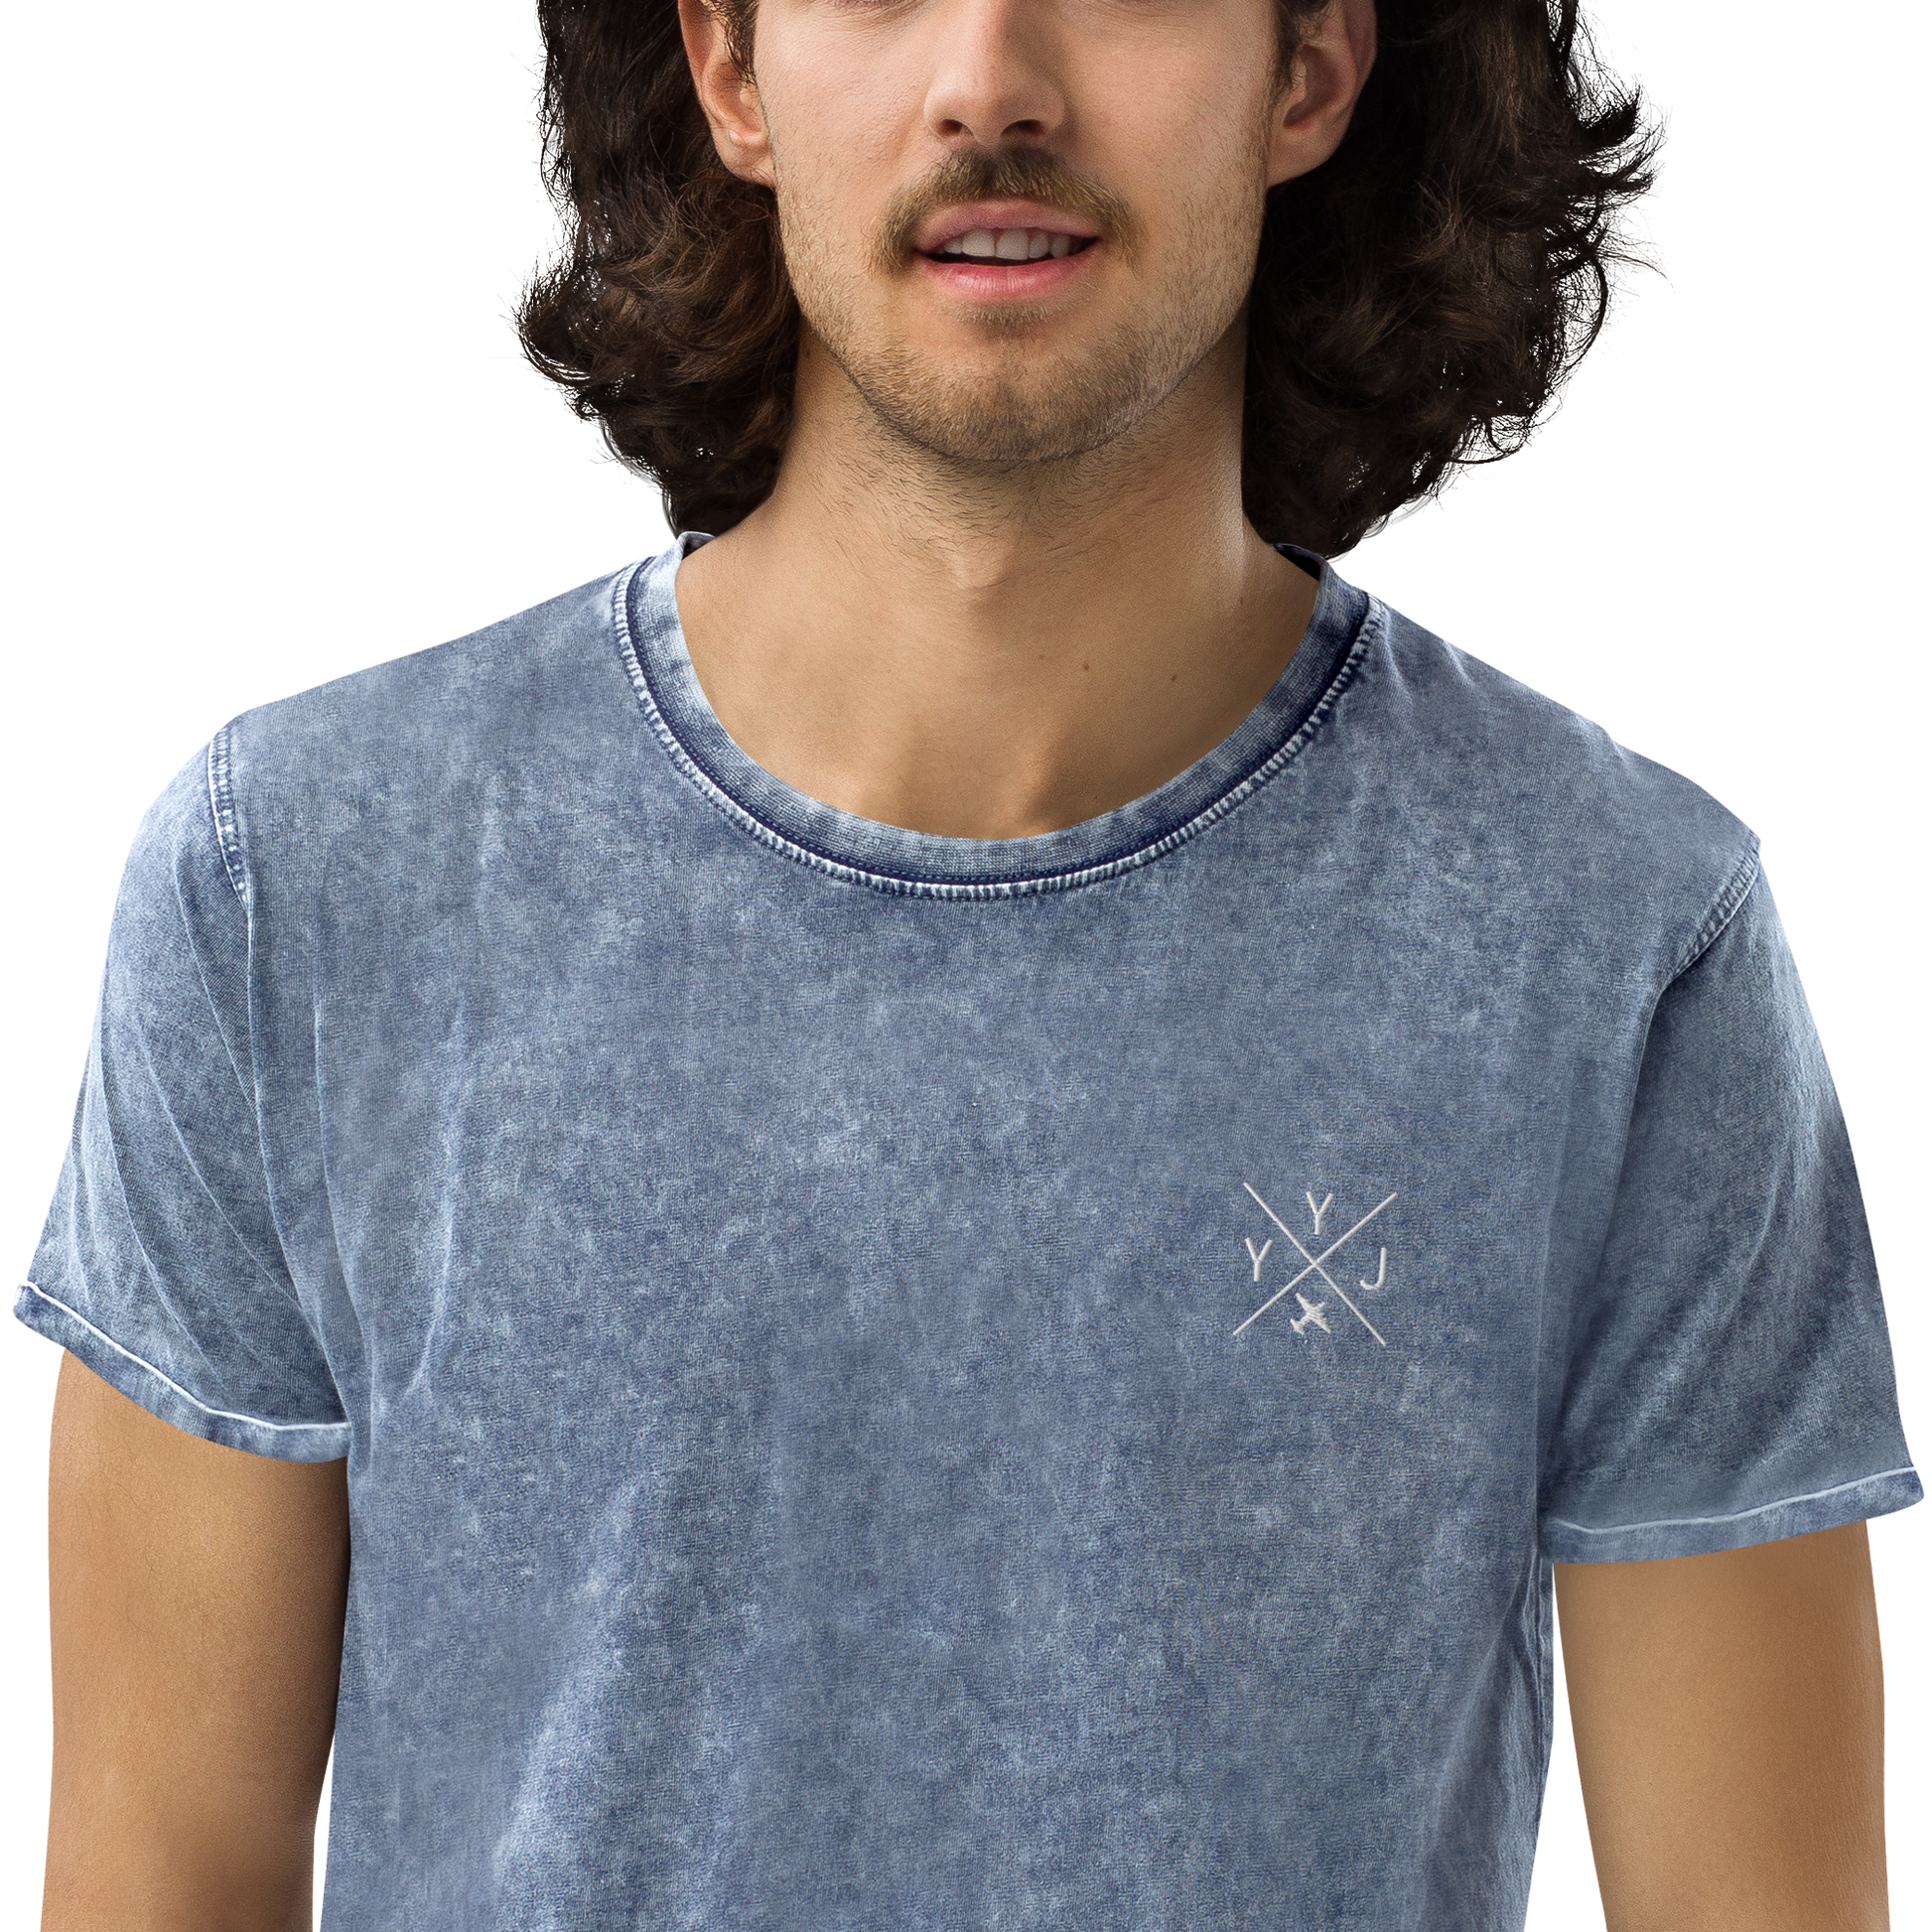 YHM Designs - YYJ Victoria Denim T-Shirt - Crossed-X Design with Airport Code and Vintage Propliner - White Embroidery - Image 12